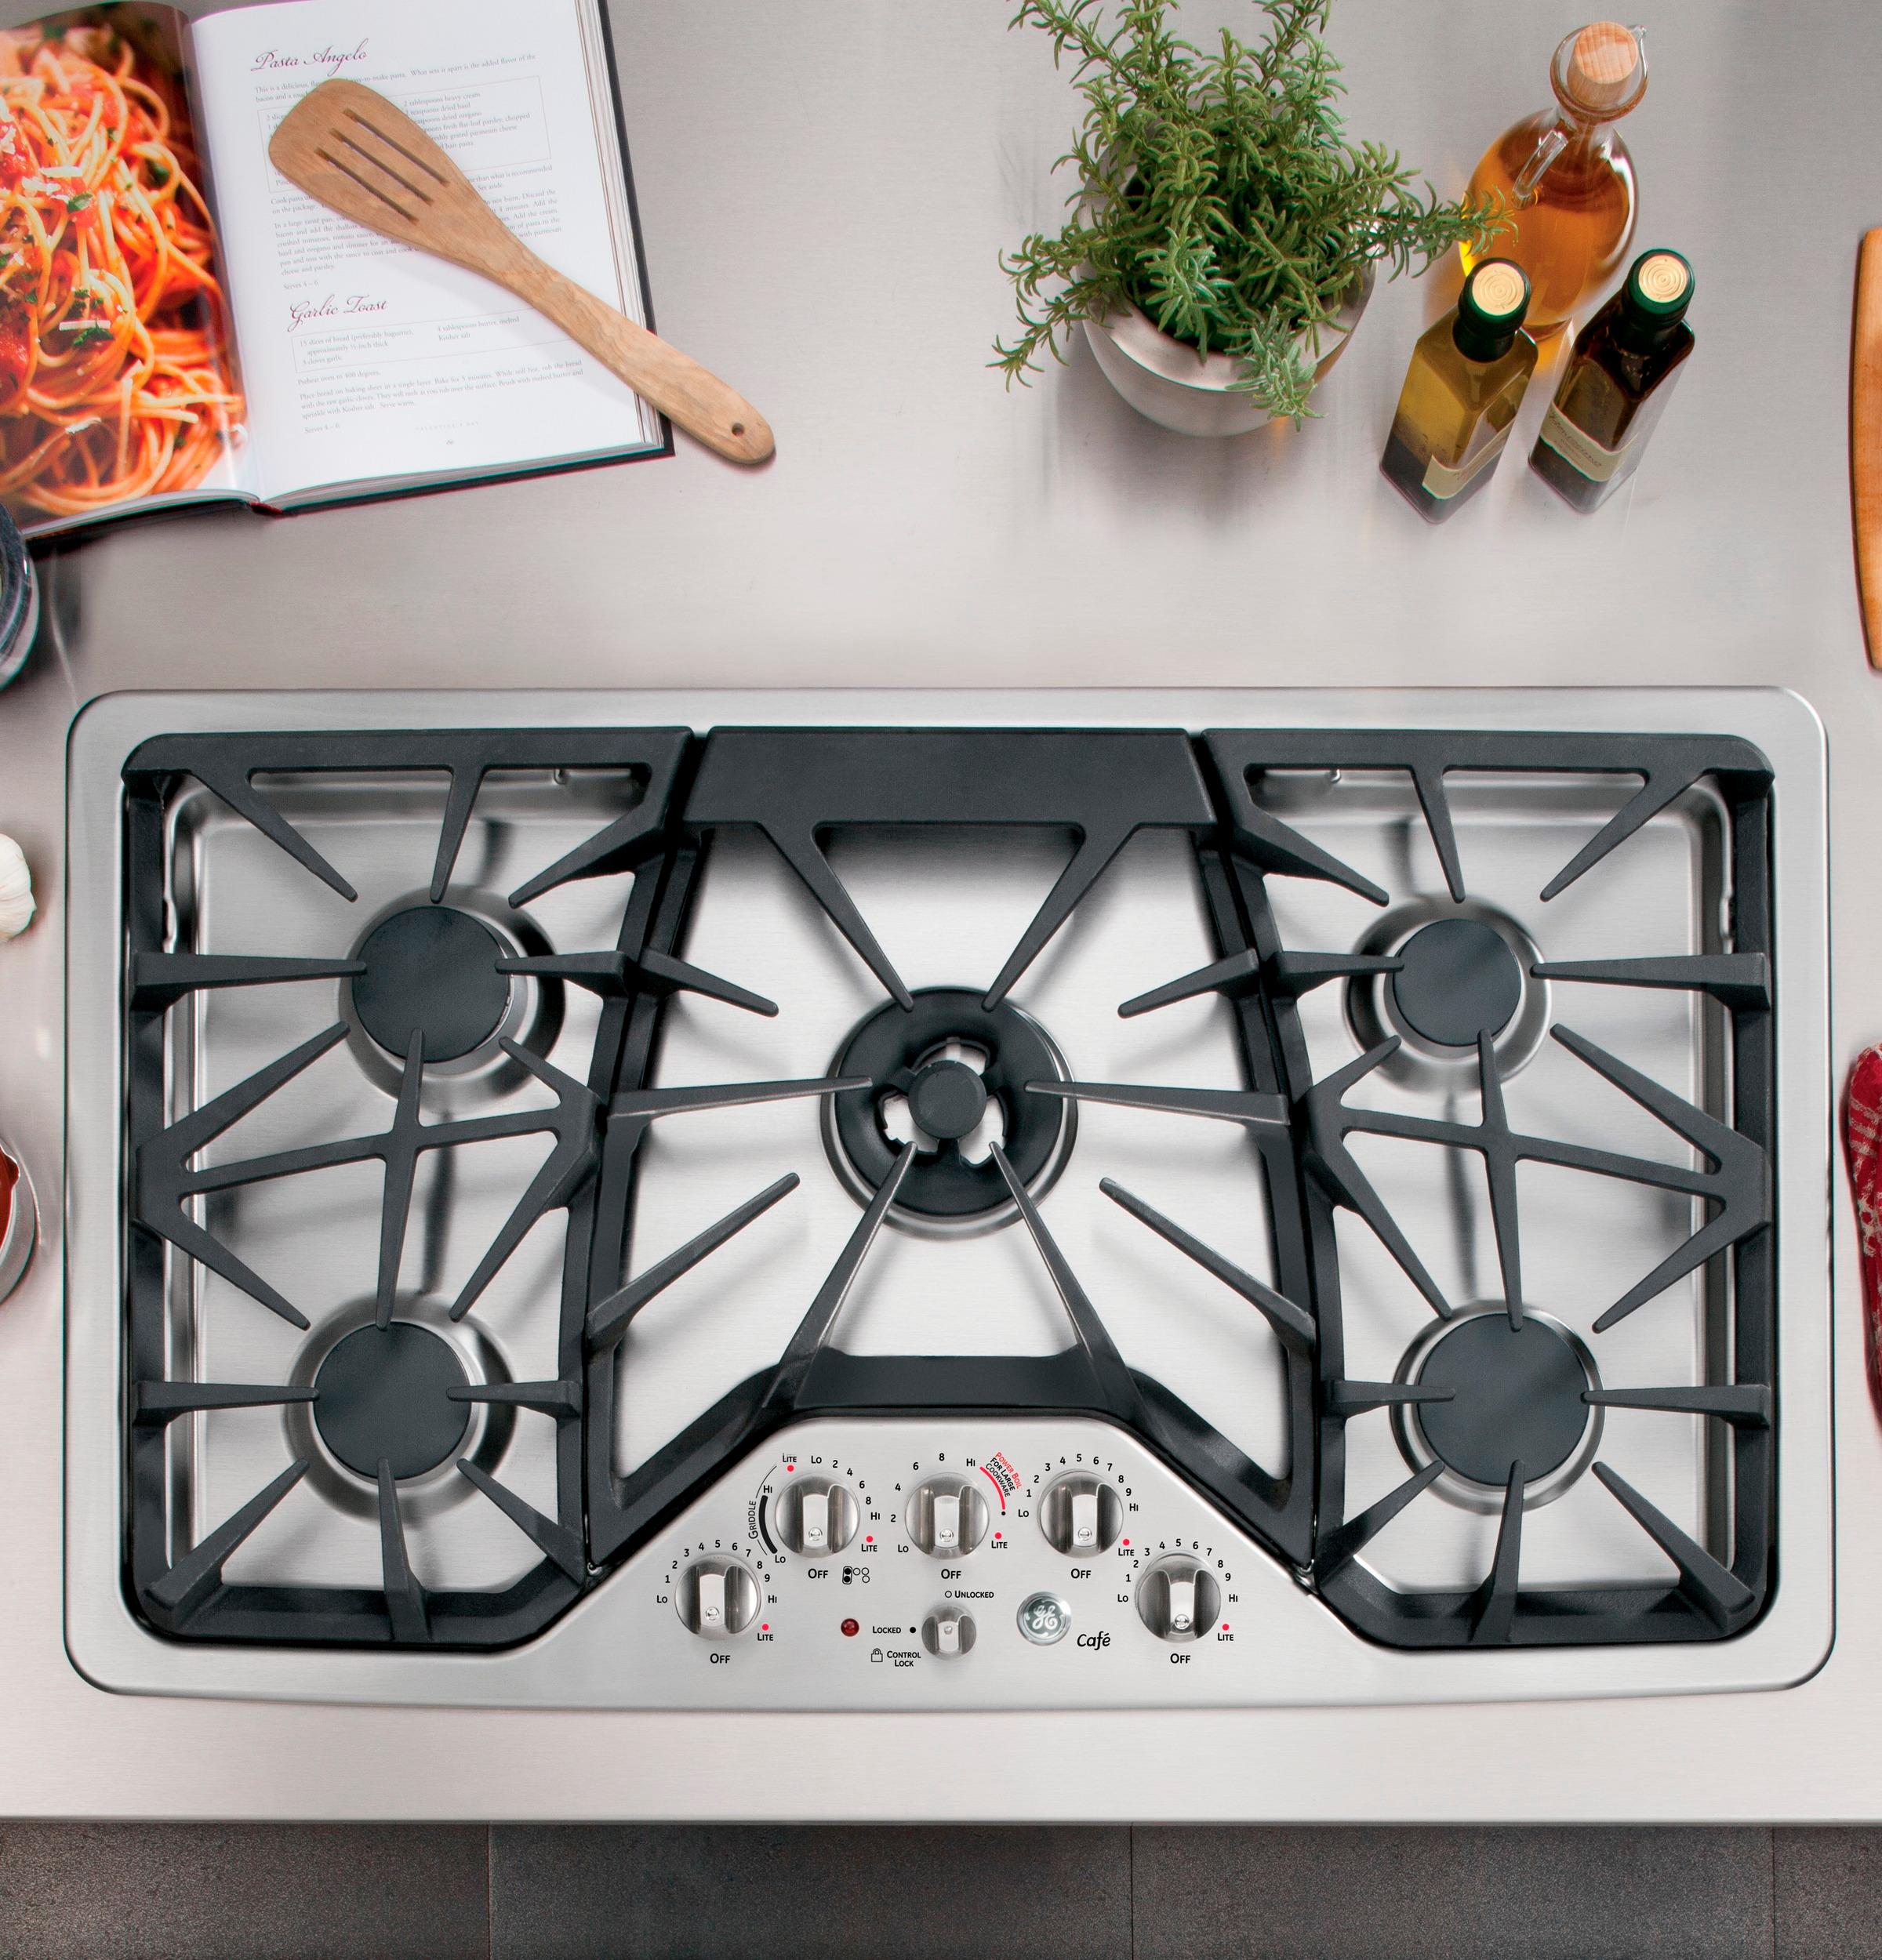 Choose A Propane Stove: Here Are Five Reasons